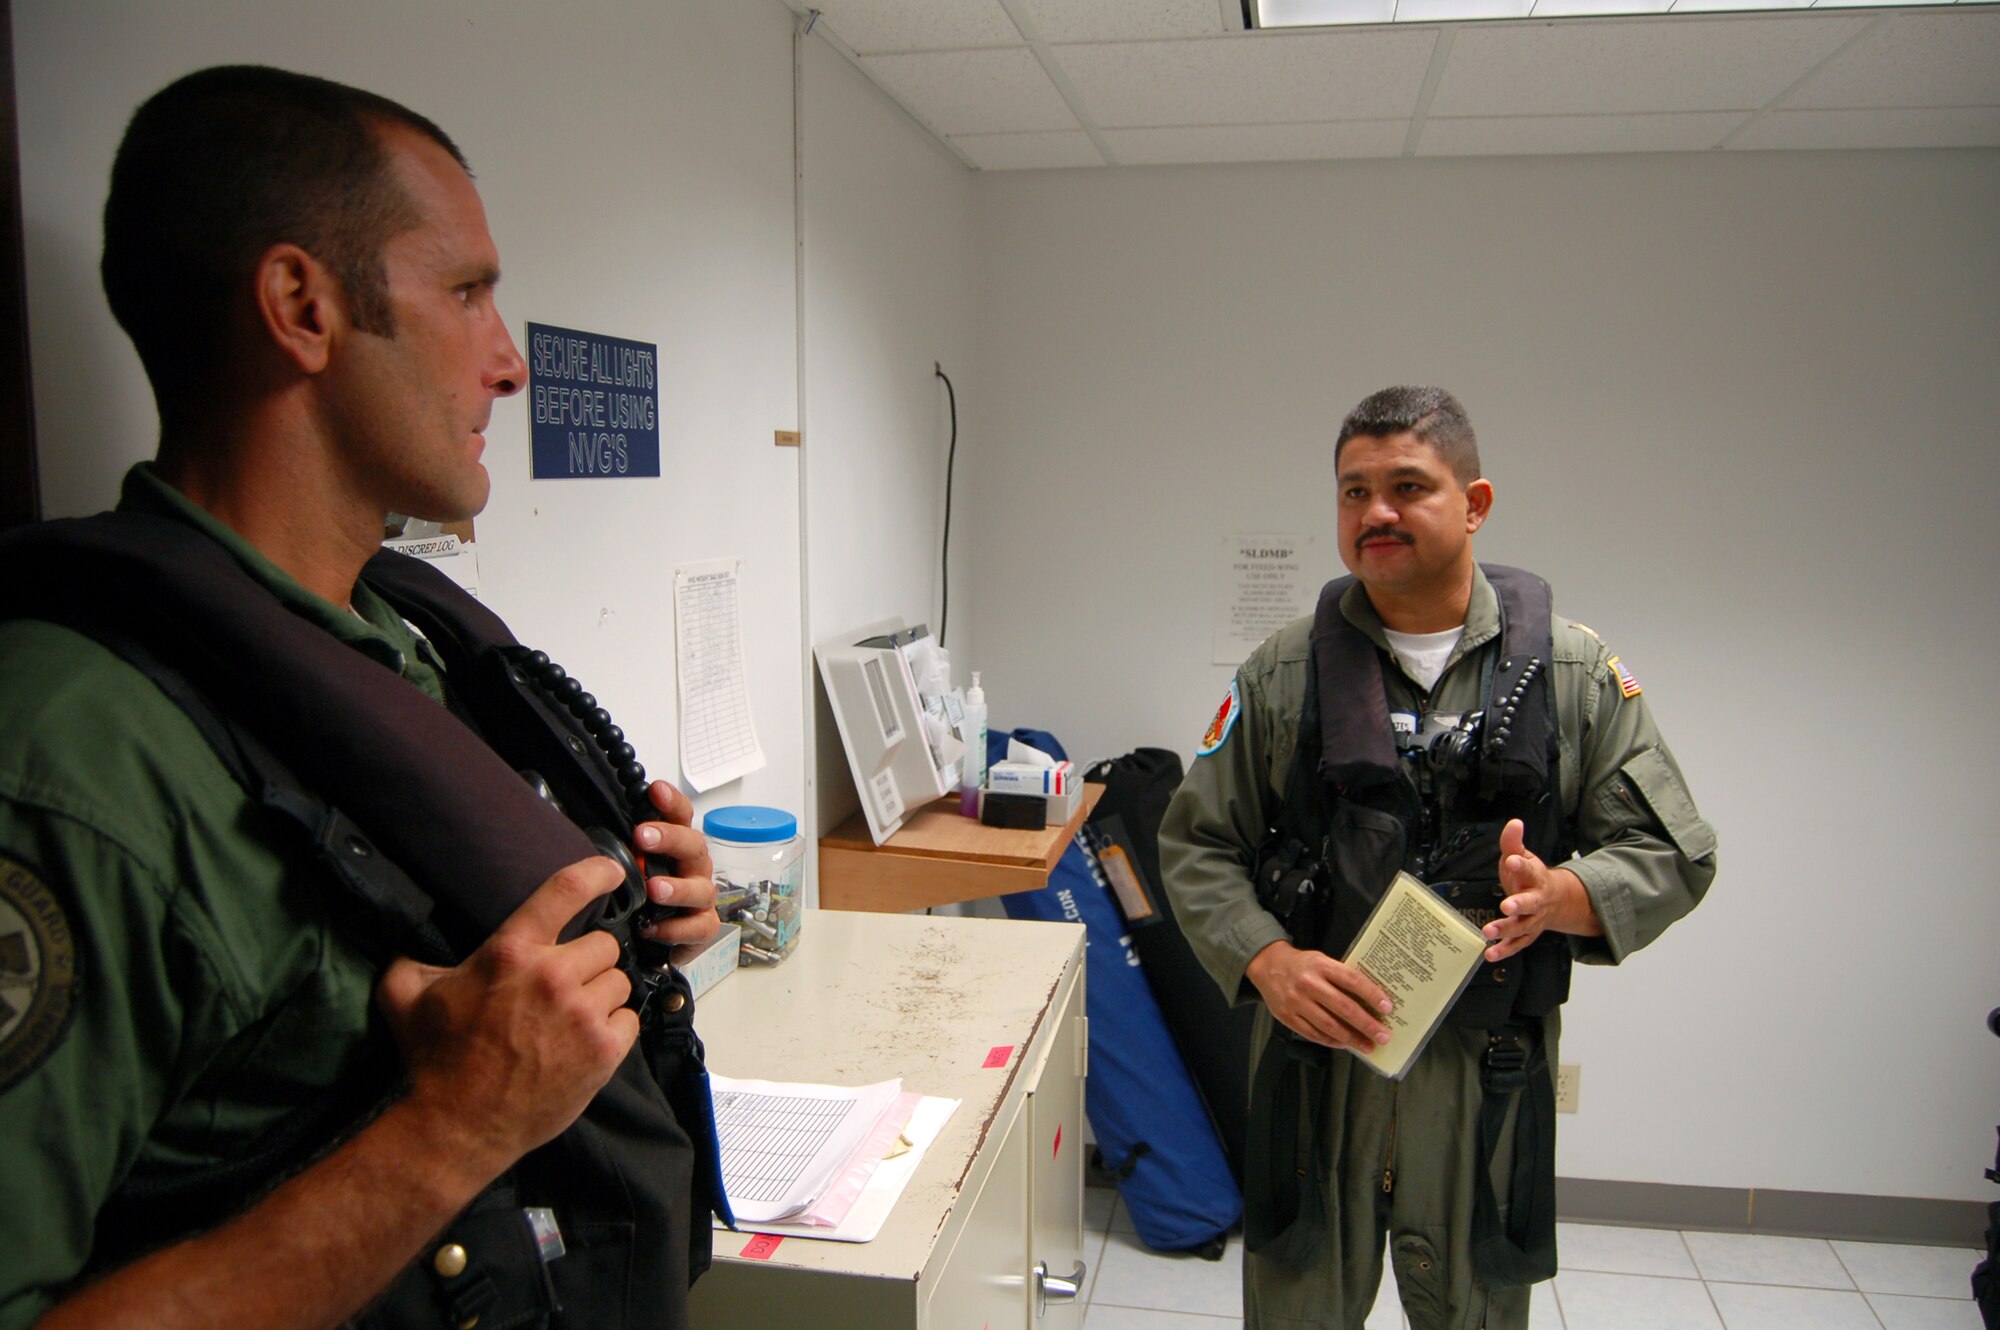 Coast Guard Lt. Cmdr. Juan Lopez (right) briefs his aircrew prior to flying an HH-65C Dolphin March 21 from Coast Guard Air Station Borinquen, Puerto Rico. A former Senior Airman, Commander Lopez is an aircraft commander and the assistant operations officer at the air station. The Coast Guard provides a search and rescue capability for 1.2 million square miles around the Caribbean. (U.S. Air Force photo/Tech. Sgt. Ben Gonzales)